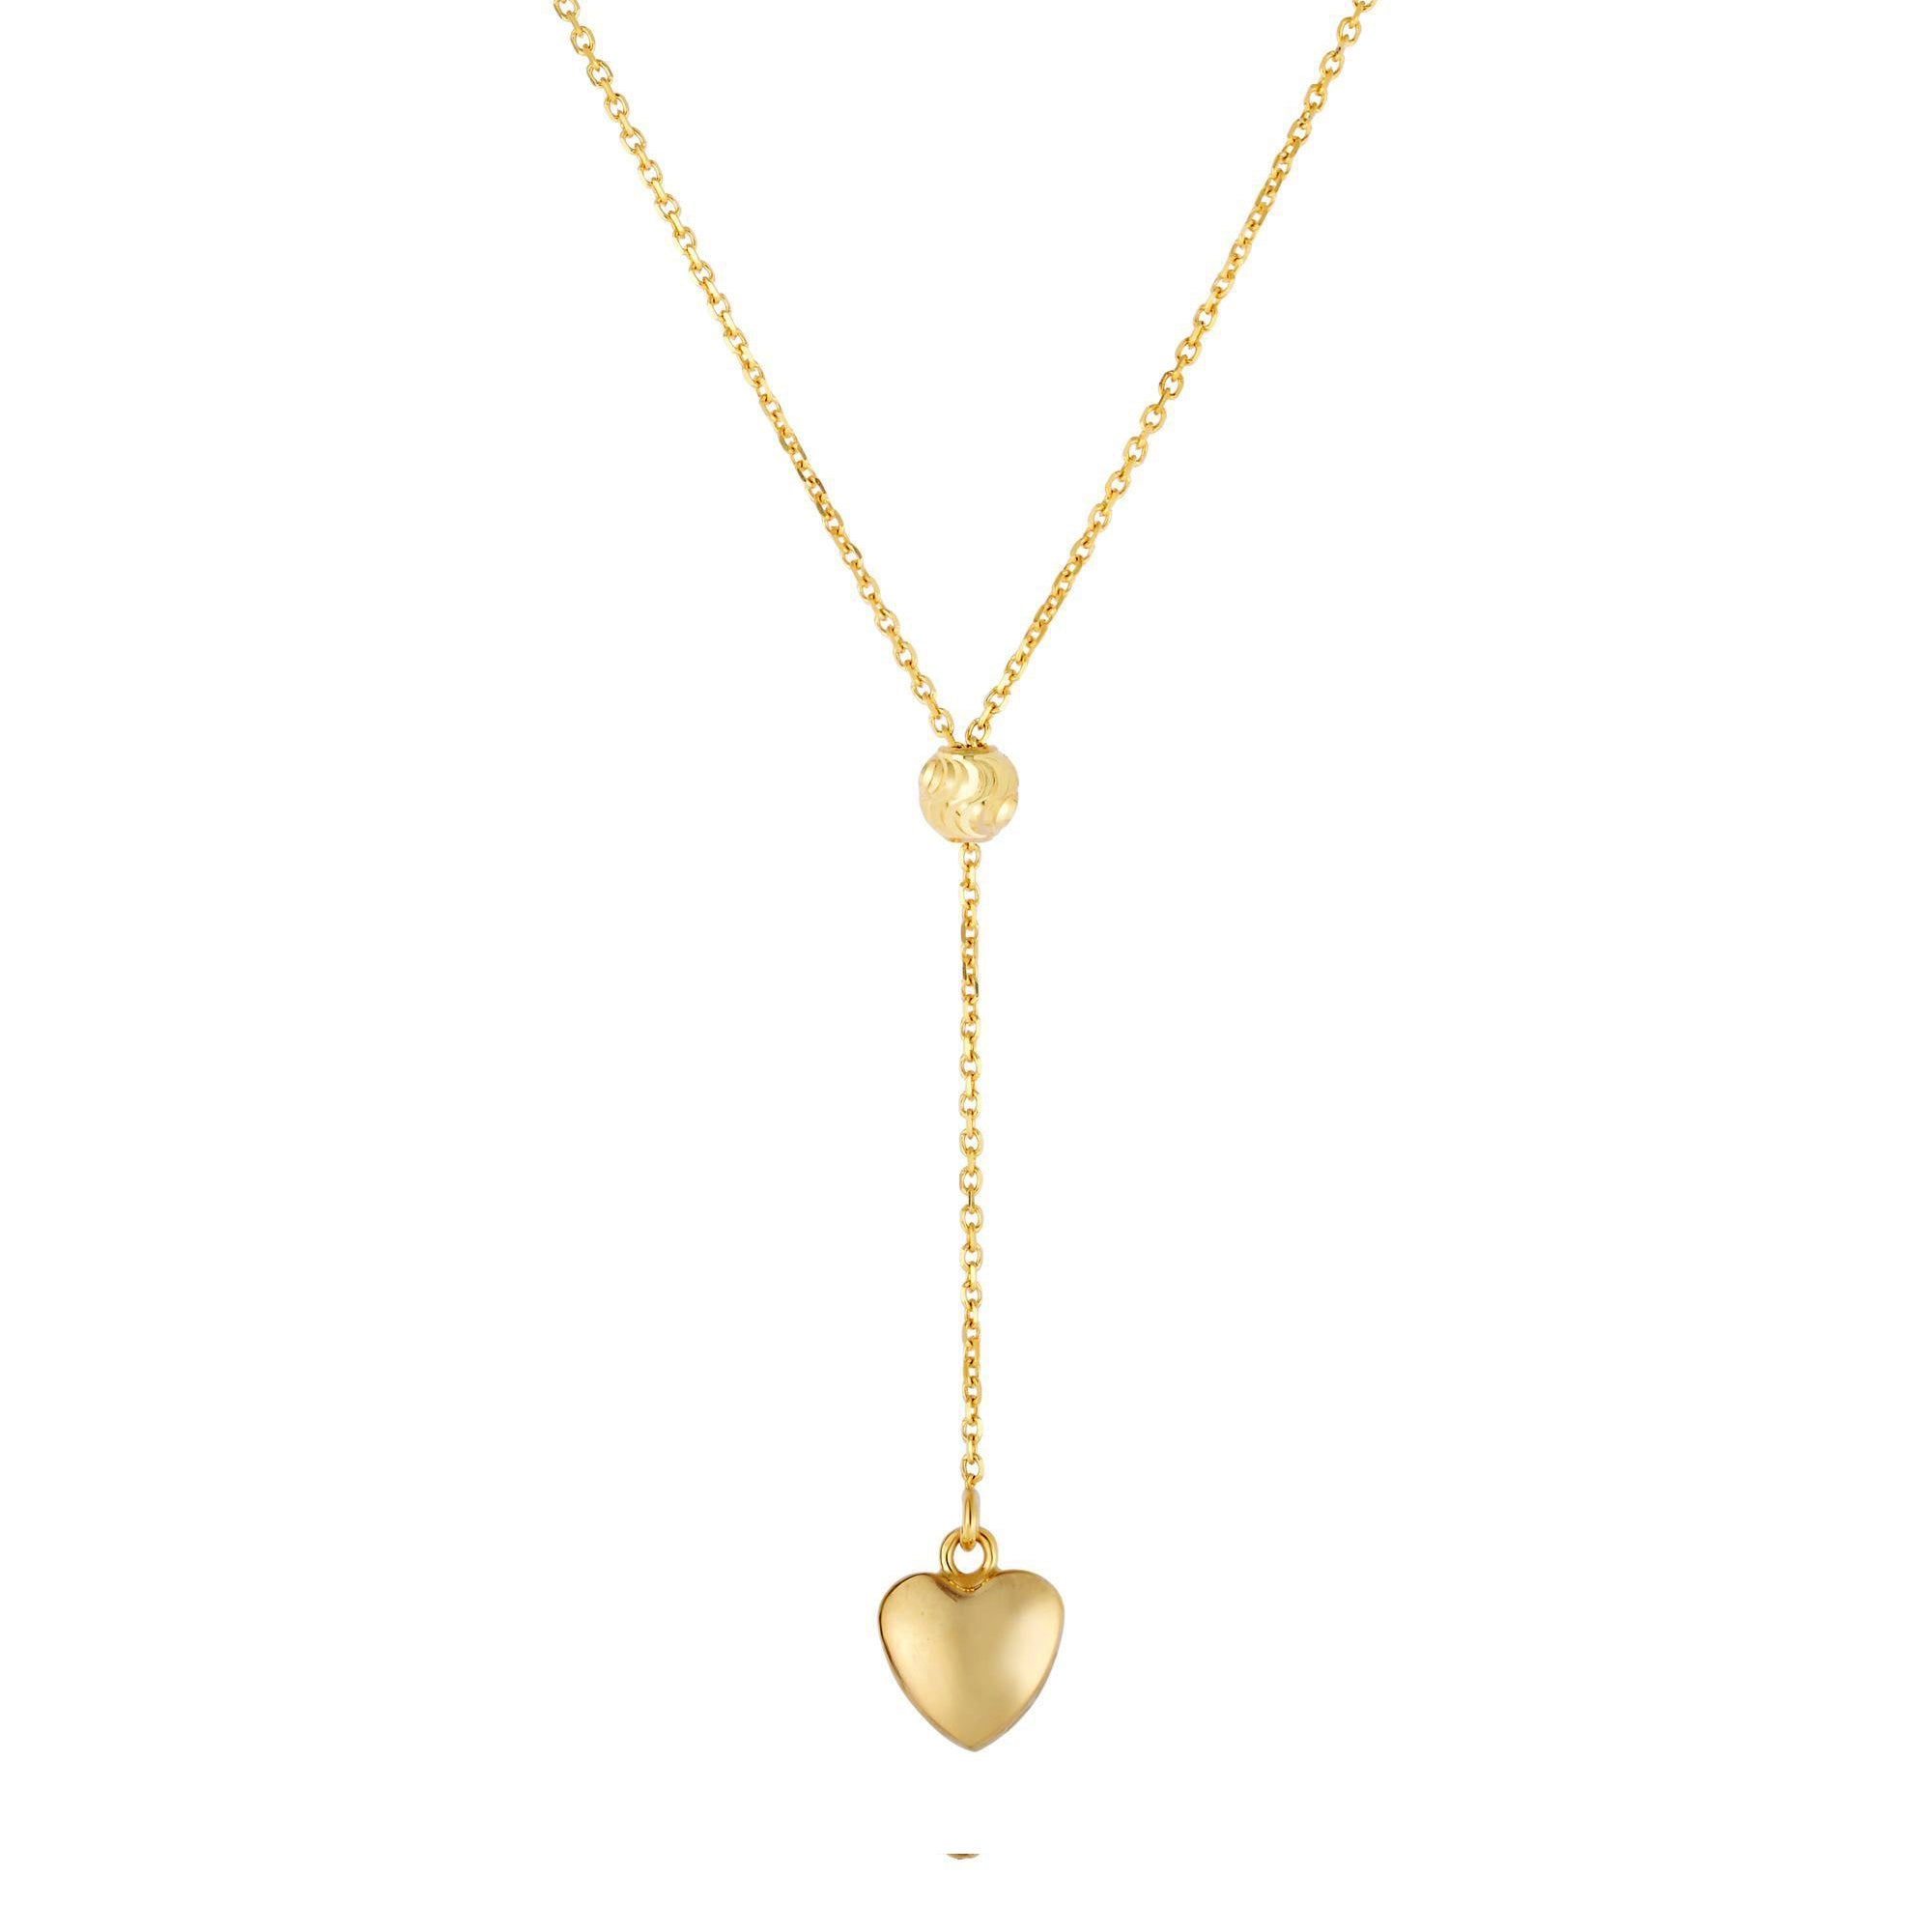 14k Yellow Gold Hanging Heart Necklace, 18"